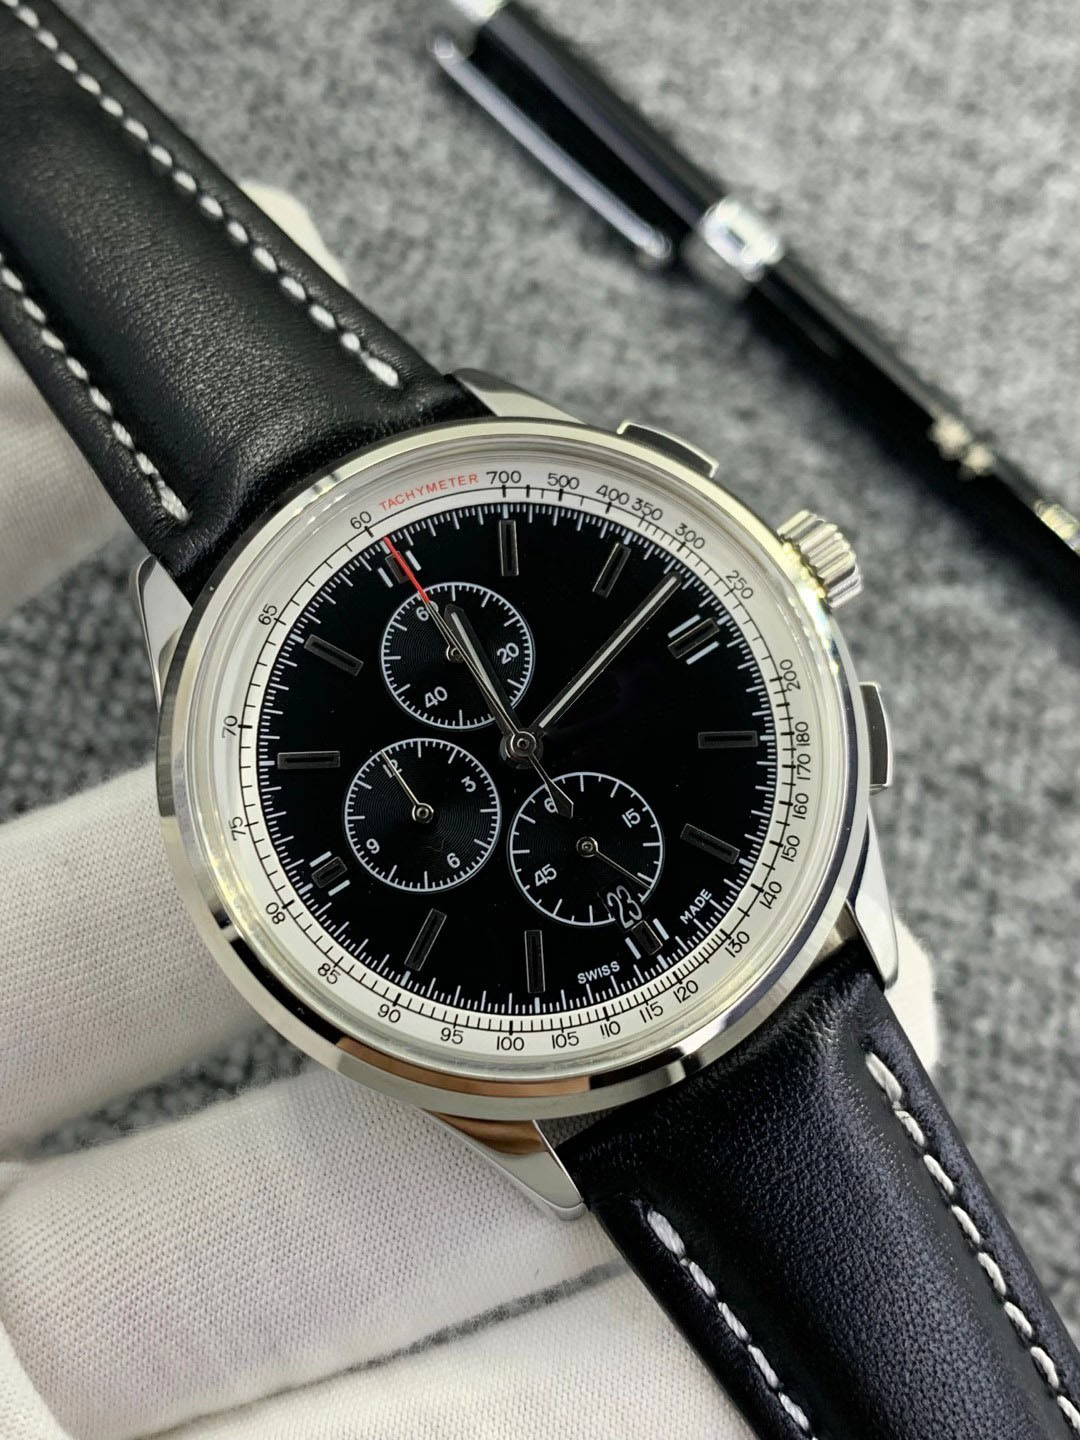 

N Quality Right Hand Watches Men Premier 42MM Black Dial Japan Movement VK Watch Quartz Chronograph Leather Strap Floding Clasp Mens Dress On Fast Track Wrist, No send watch for shipping